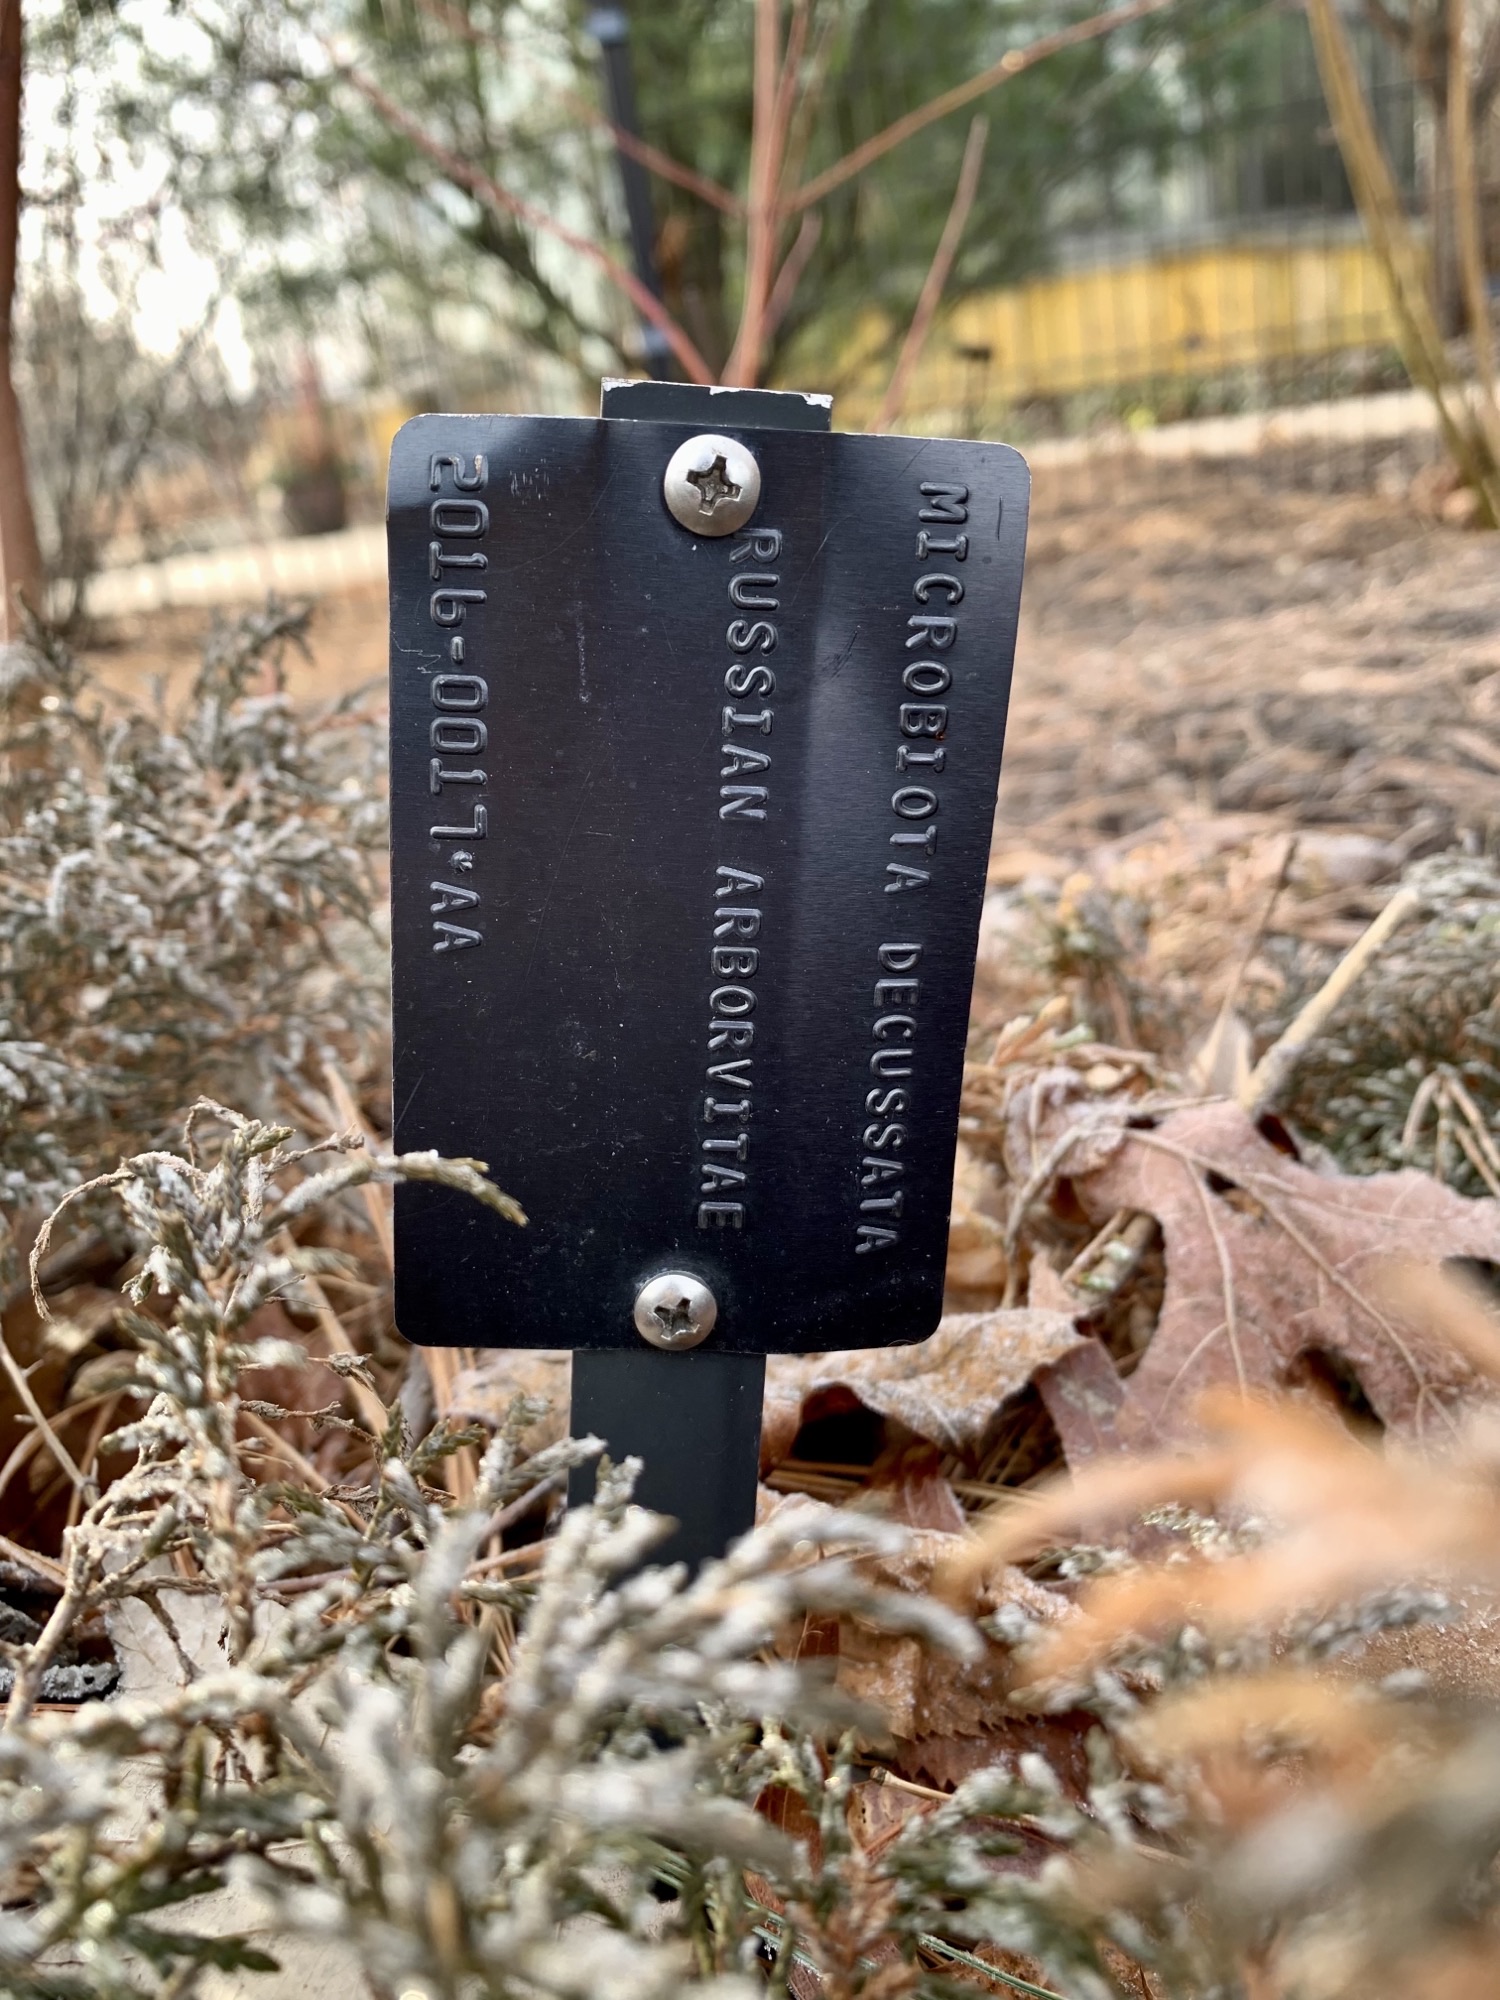 plant identification tag attached to tree base